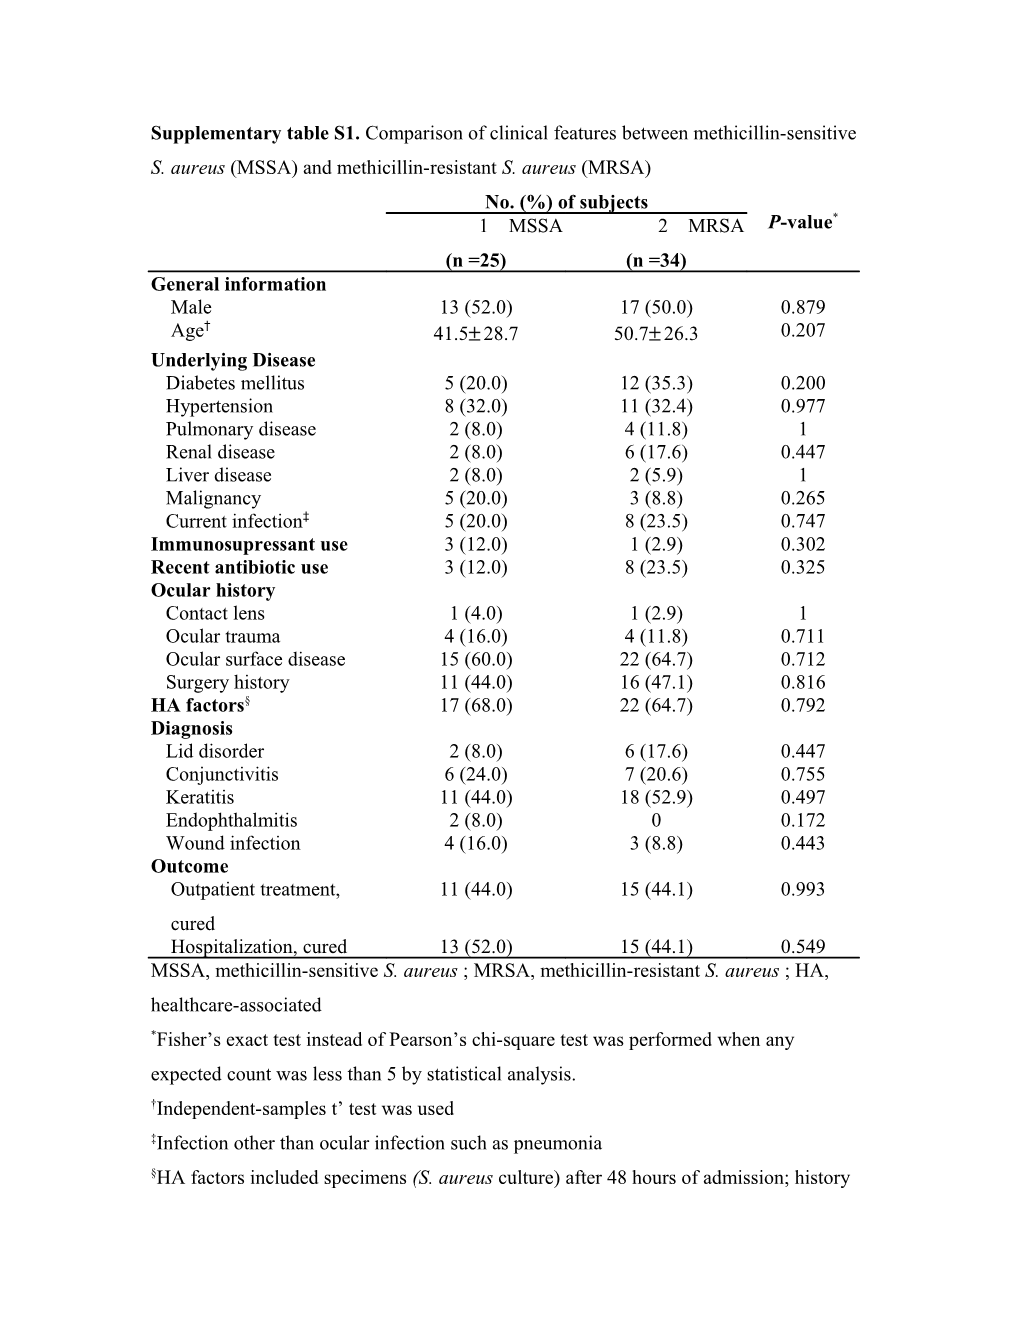 Supplementary Table S1. Comparison of Clinical Features Between Methicillin-Sensitive